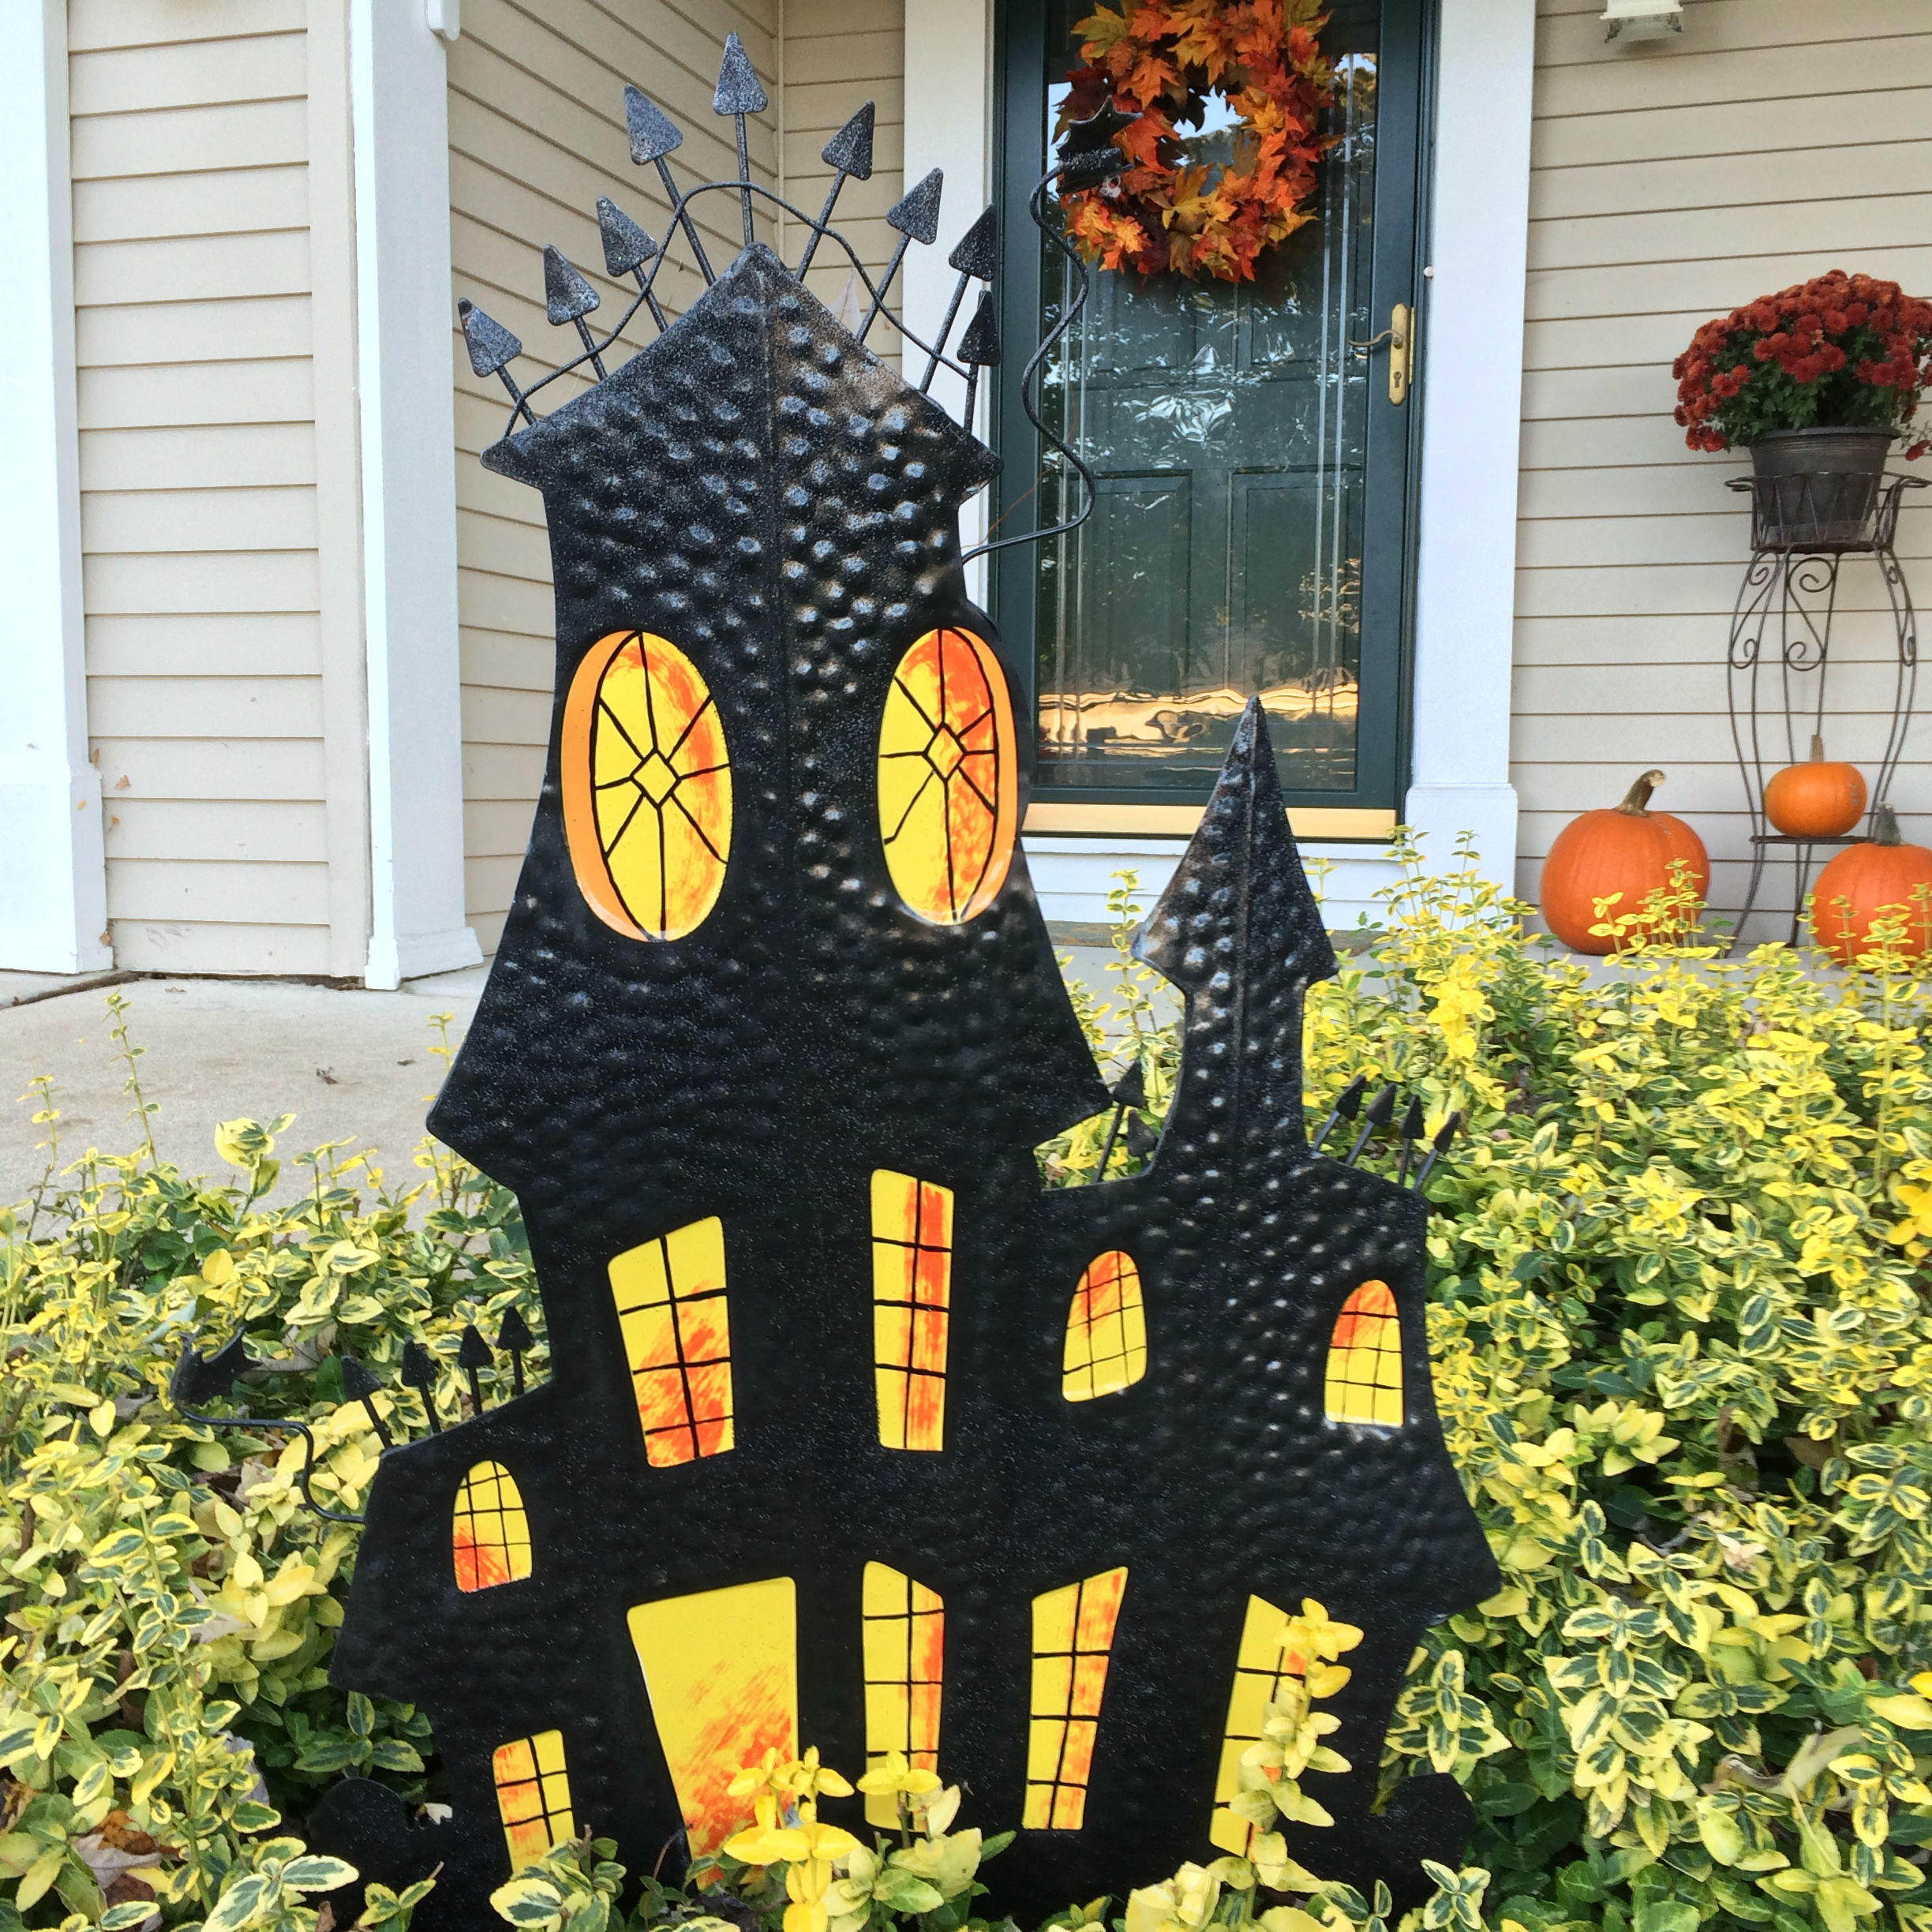 Outdoor Halloween Decor Ideas on a Budget - My One and Only Home